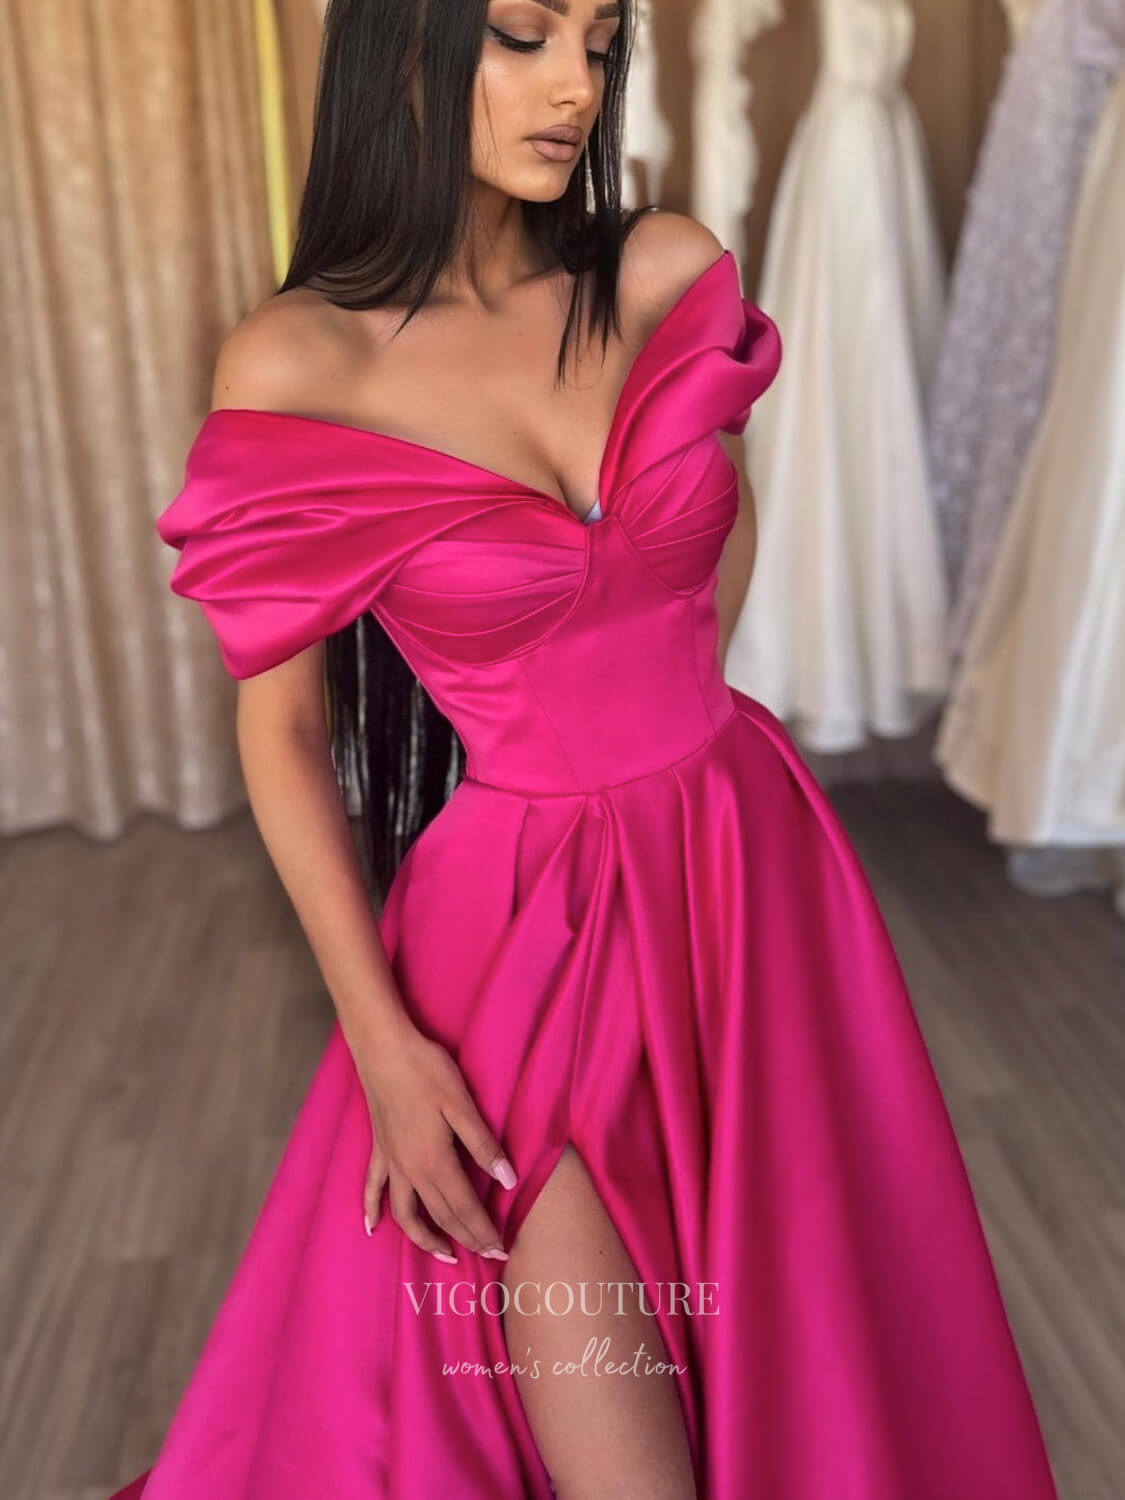 vigocouture-Pink Off the Shoulder Prom Dresses With Slit Satin A-Line Evening Dress 21773-Prom Dresses-vigocouture-